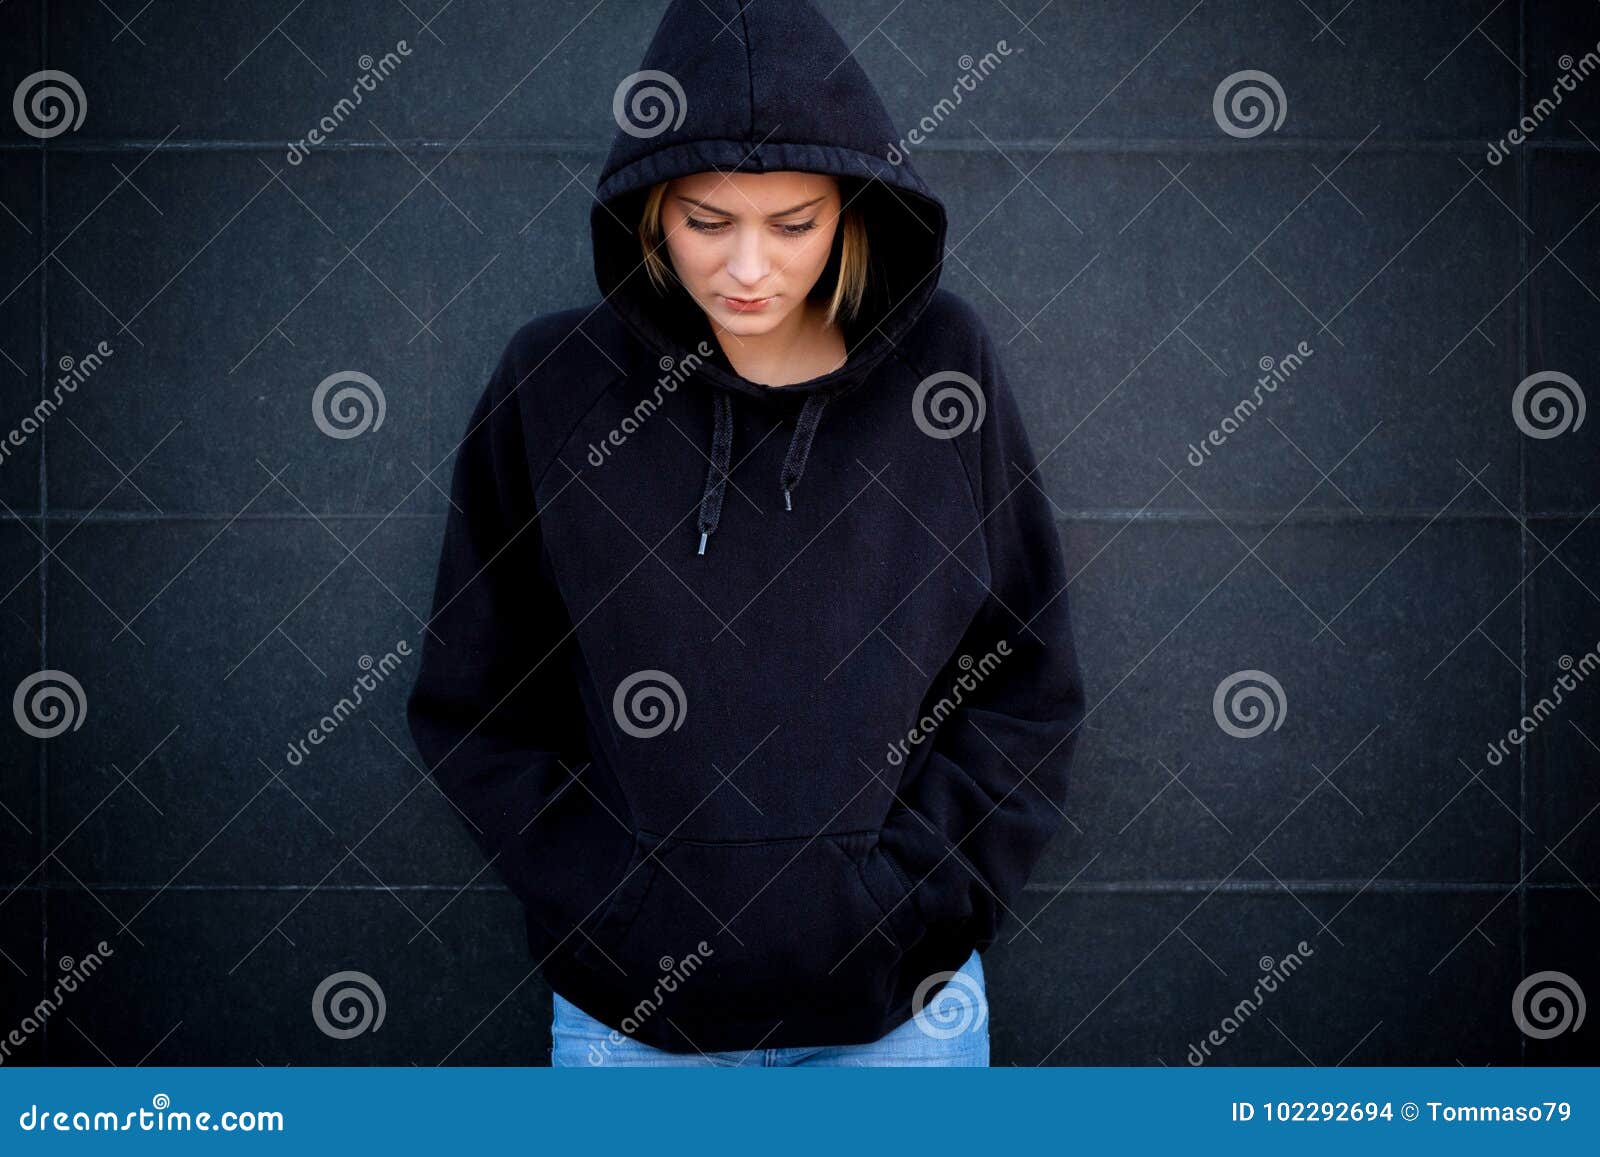 Alone and Sad Girl Portrait on Black Wall Stock Photo - Image of high,  depressed: 102292694